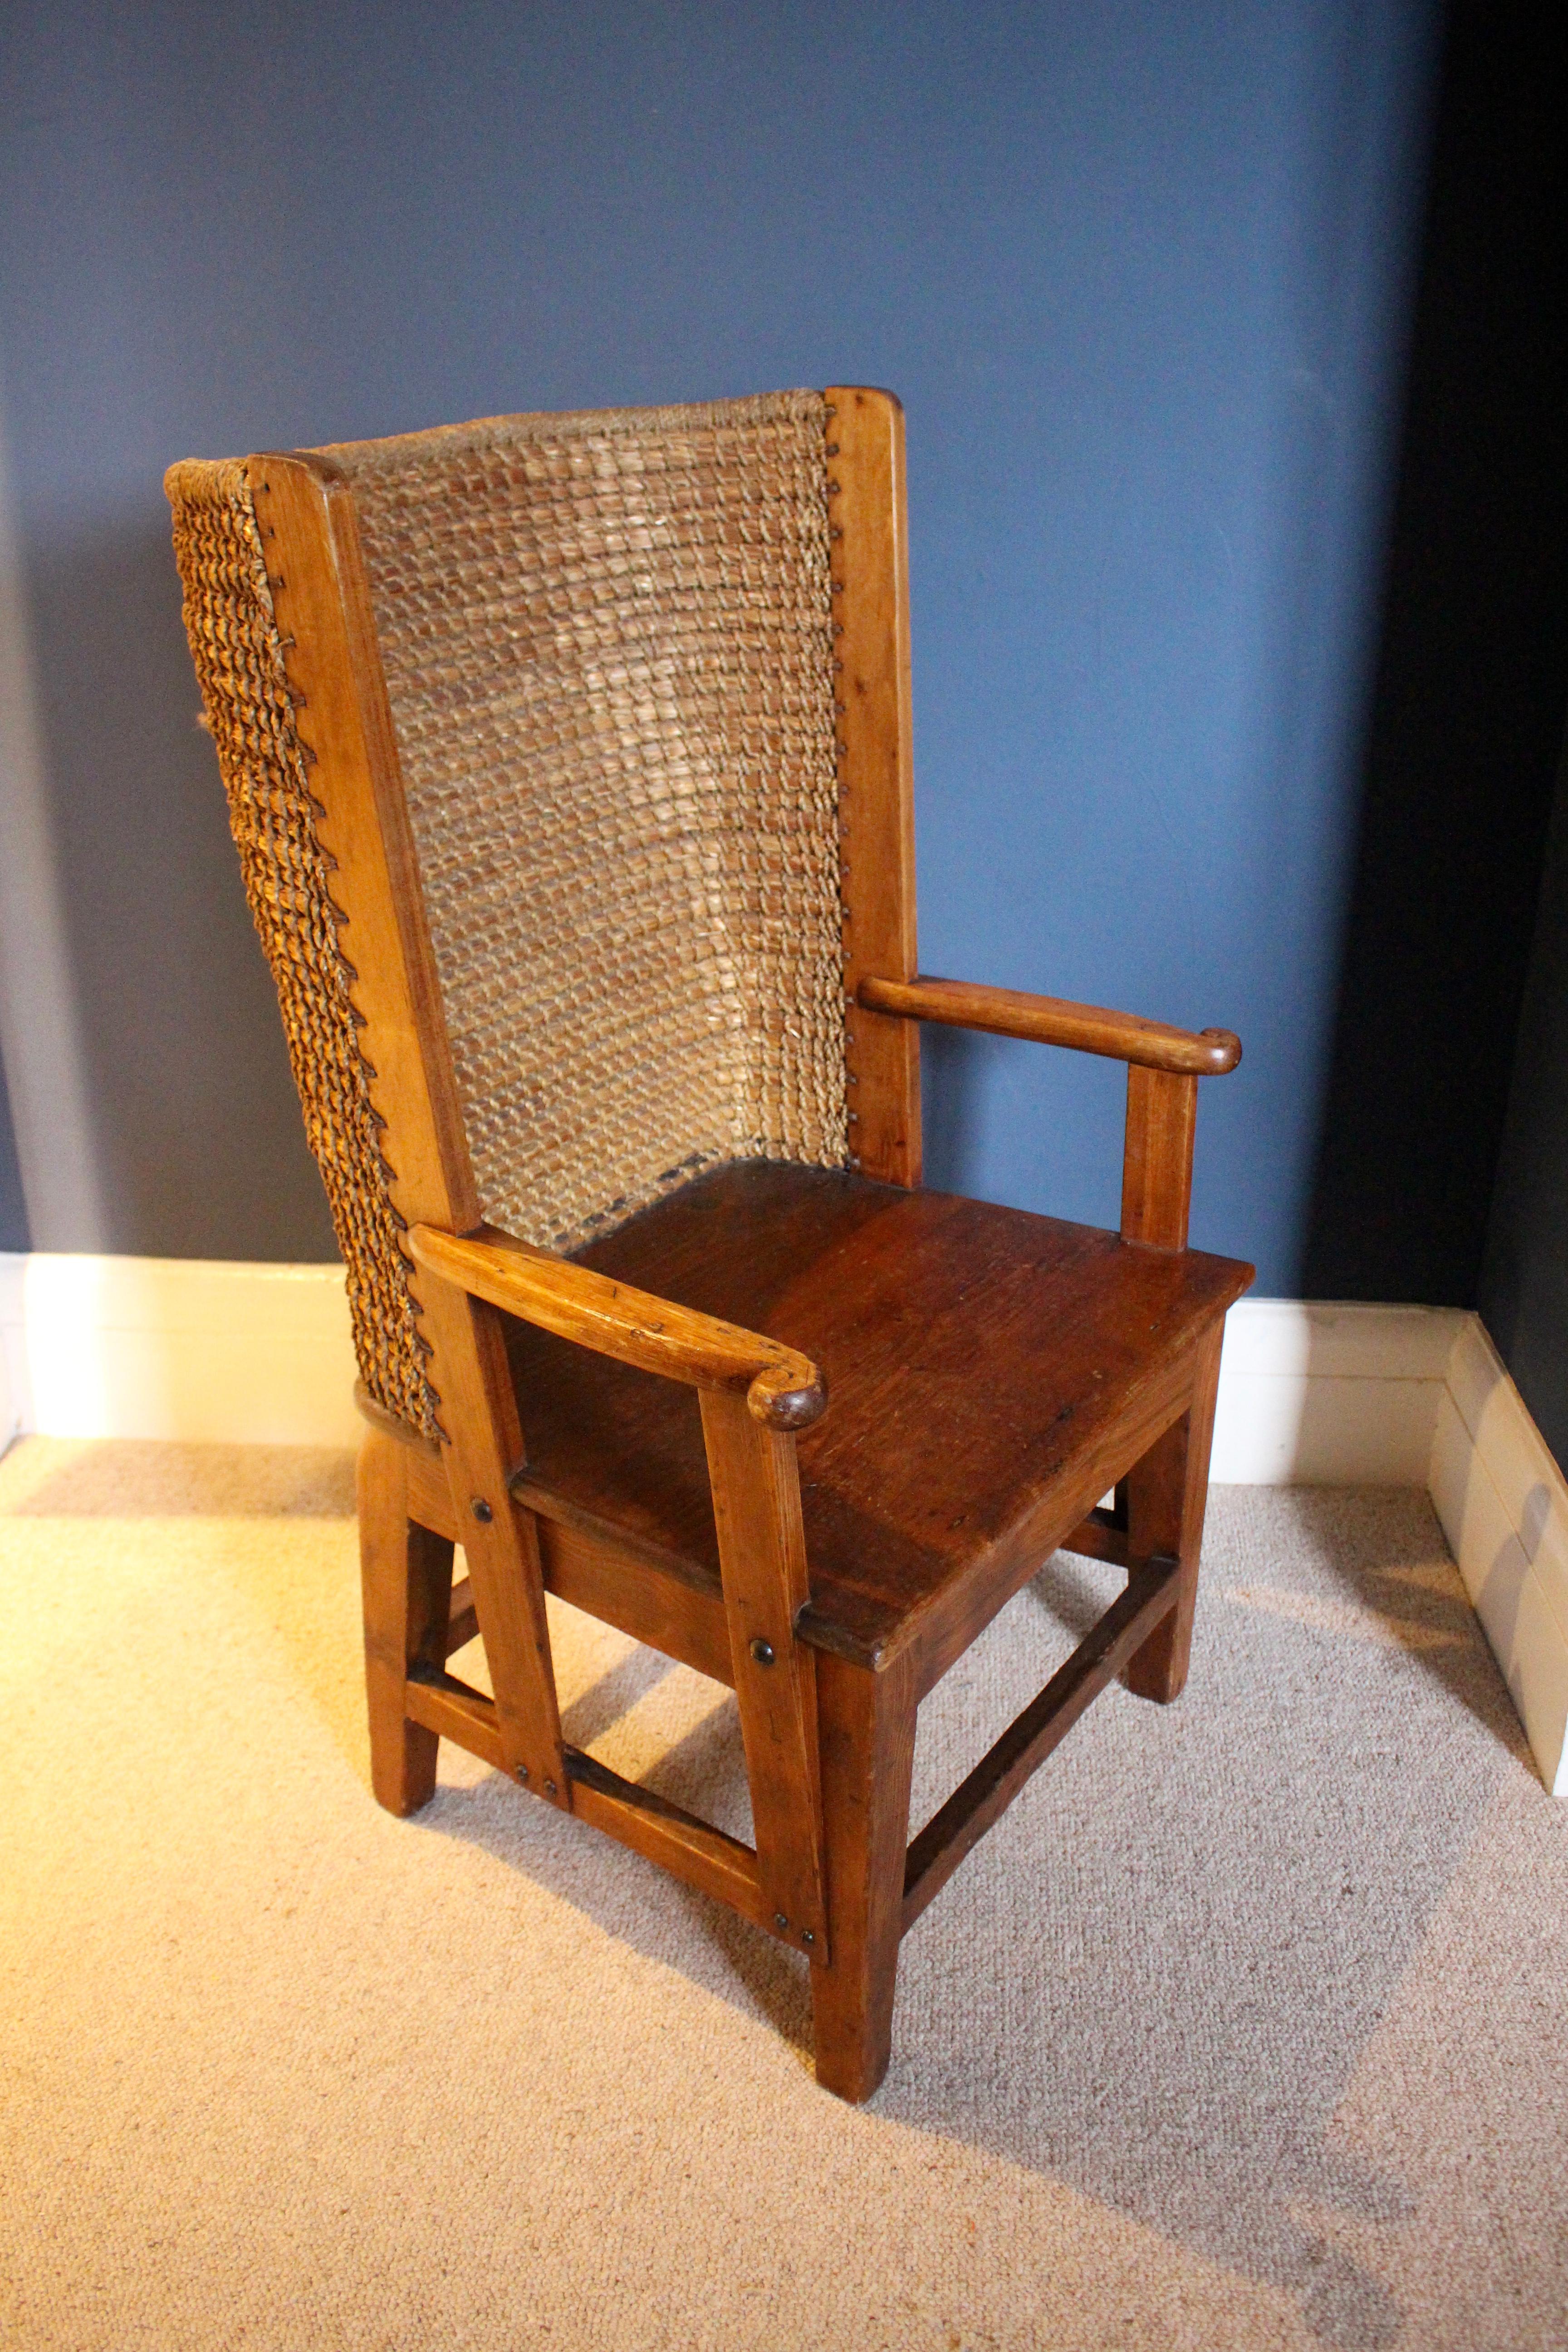 A delightful and well made Orkney Chair. In good condition and although of smaller proportions it's large enough for the smaller size adult to sit in snuggly! I'm 15 stone and 5' 10